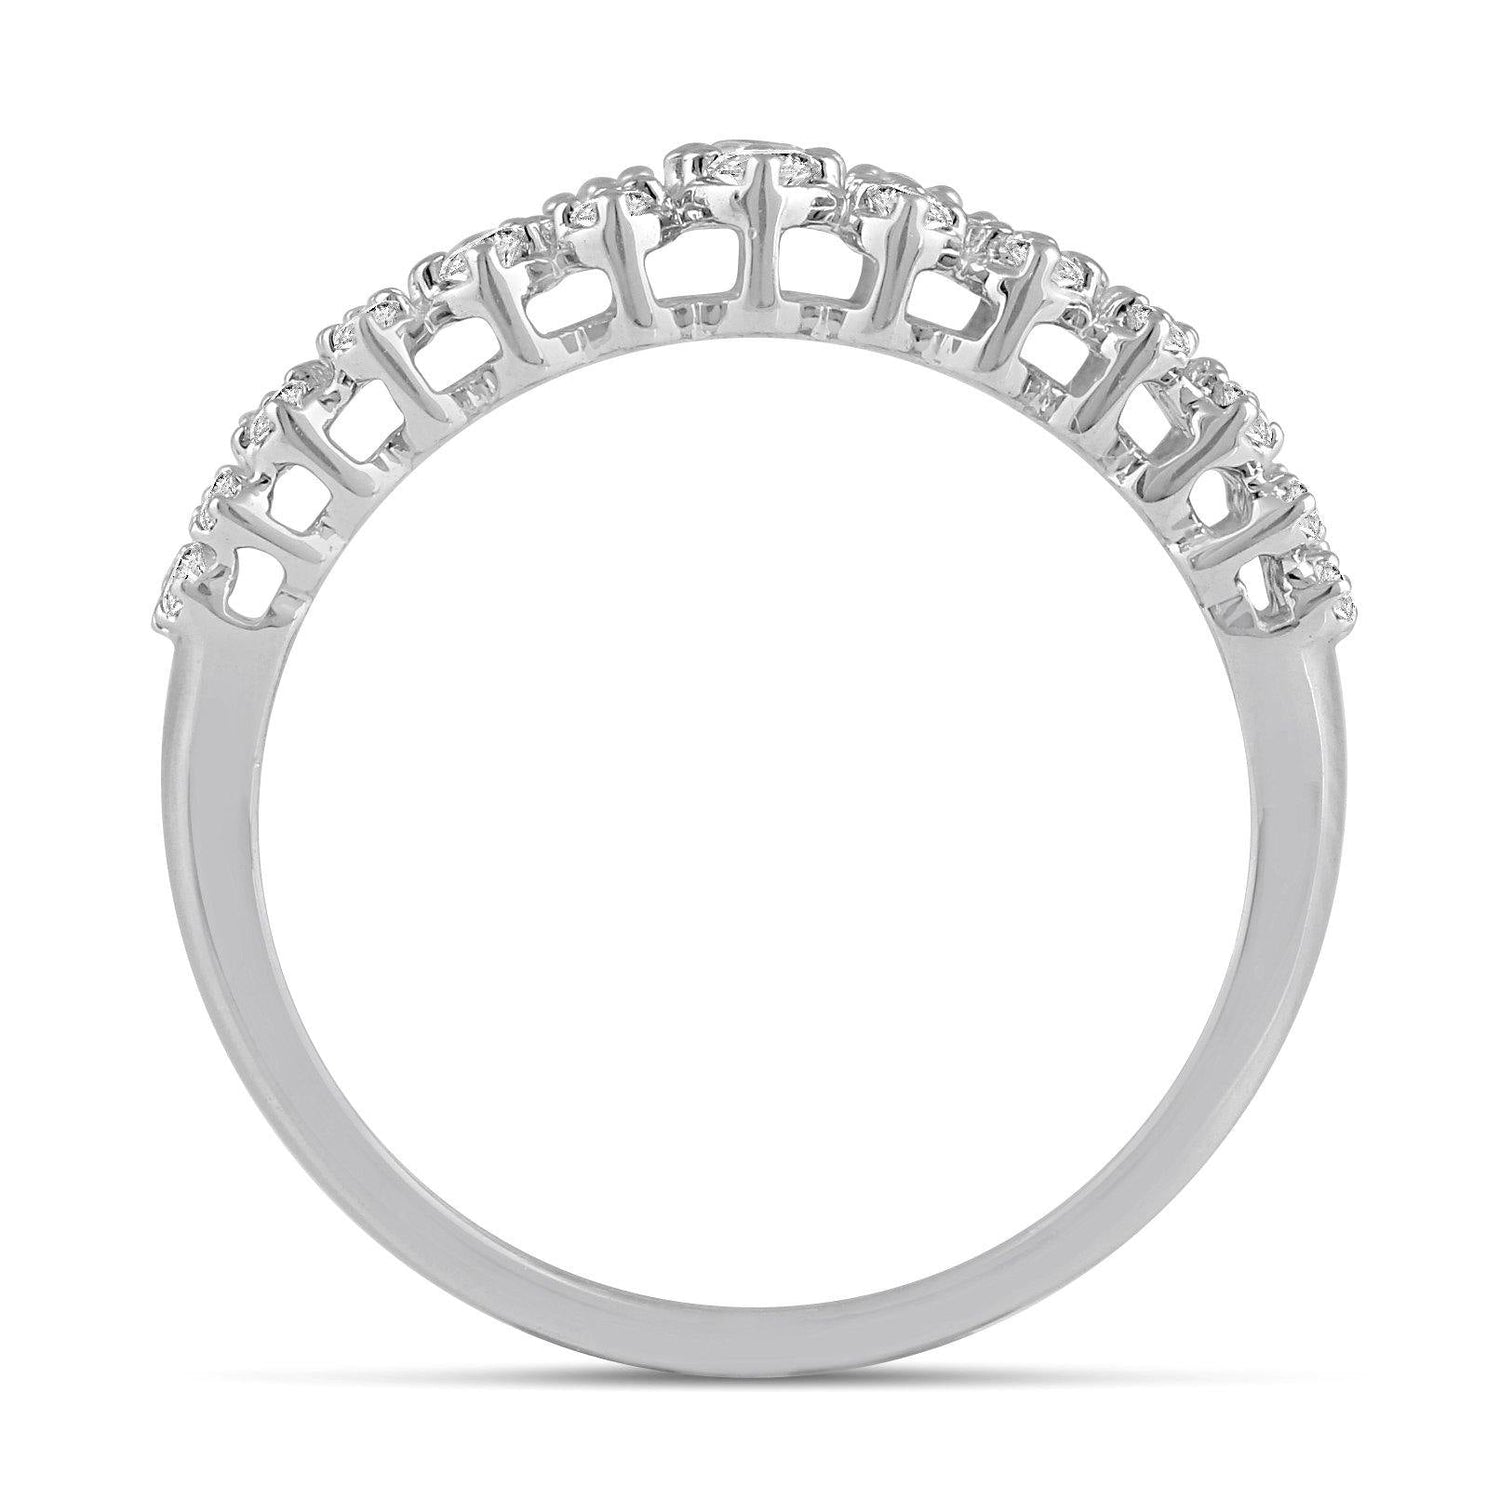 1/2CT TW Diamond Anniversary Ring in Sterling Silver - Fifth and Fine